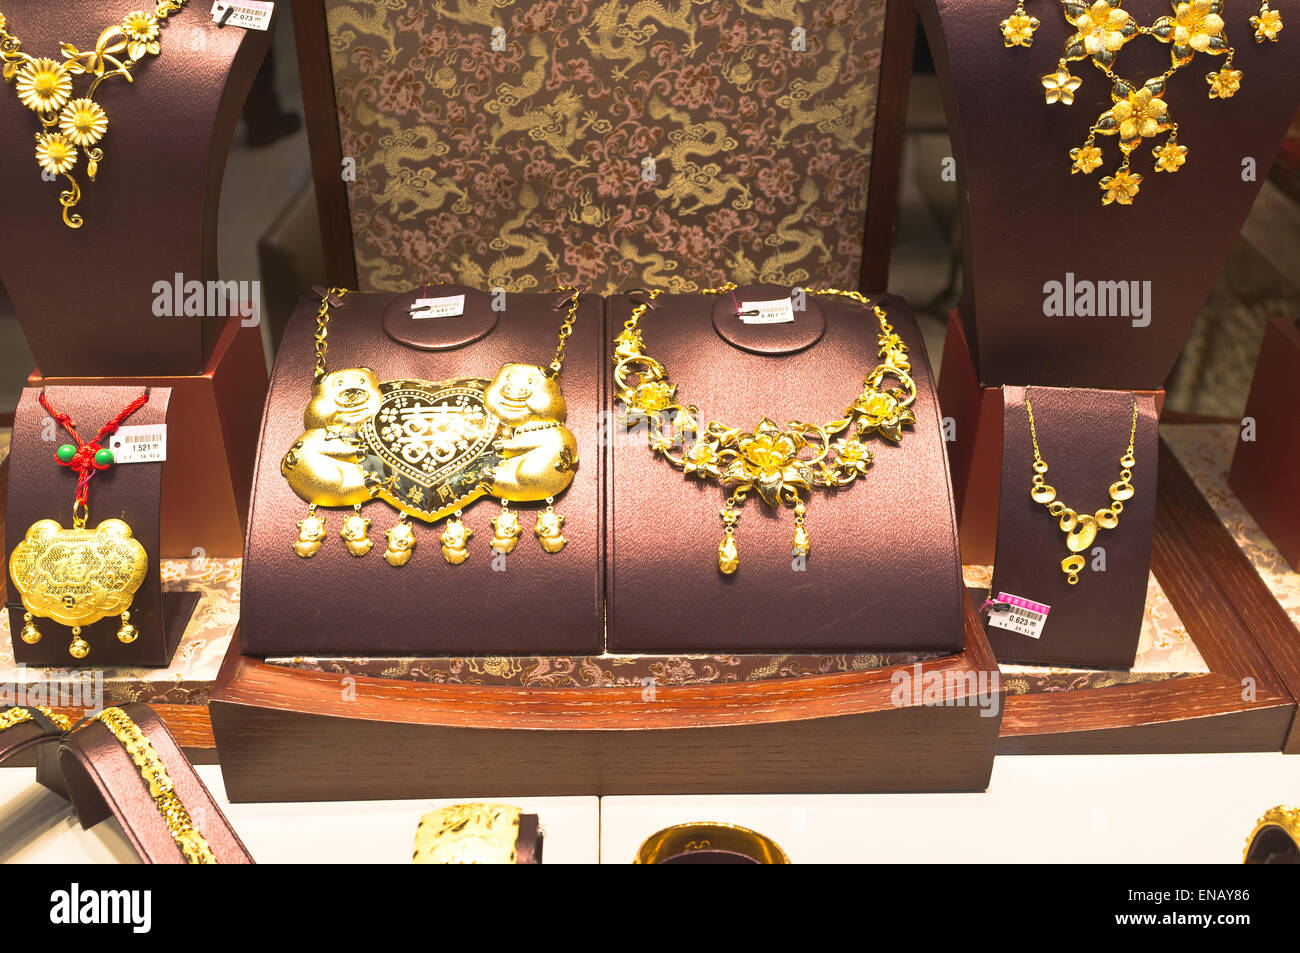 dh Shop window display SHOPPING HONG KONG Gold necklaces jewelry luxury chinese necklace china jewellery Stock Photo